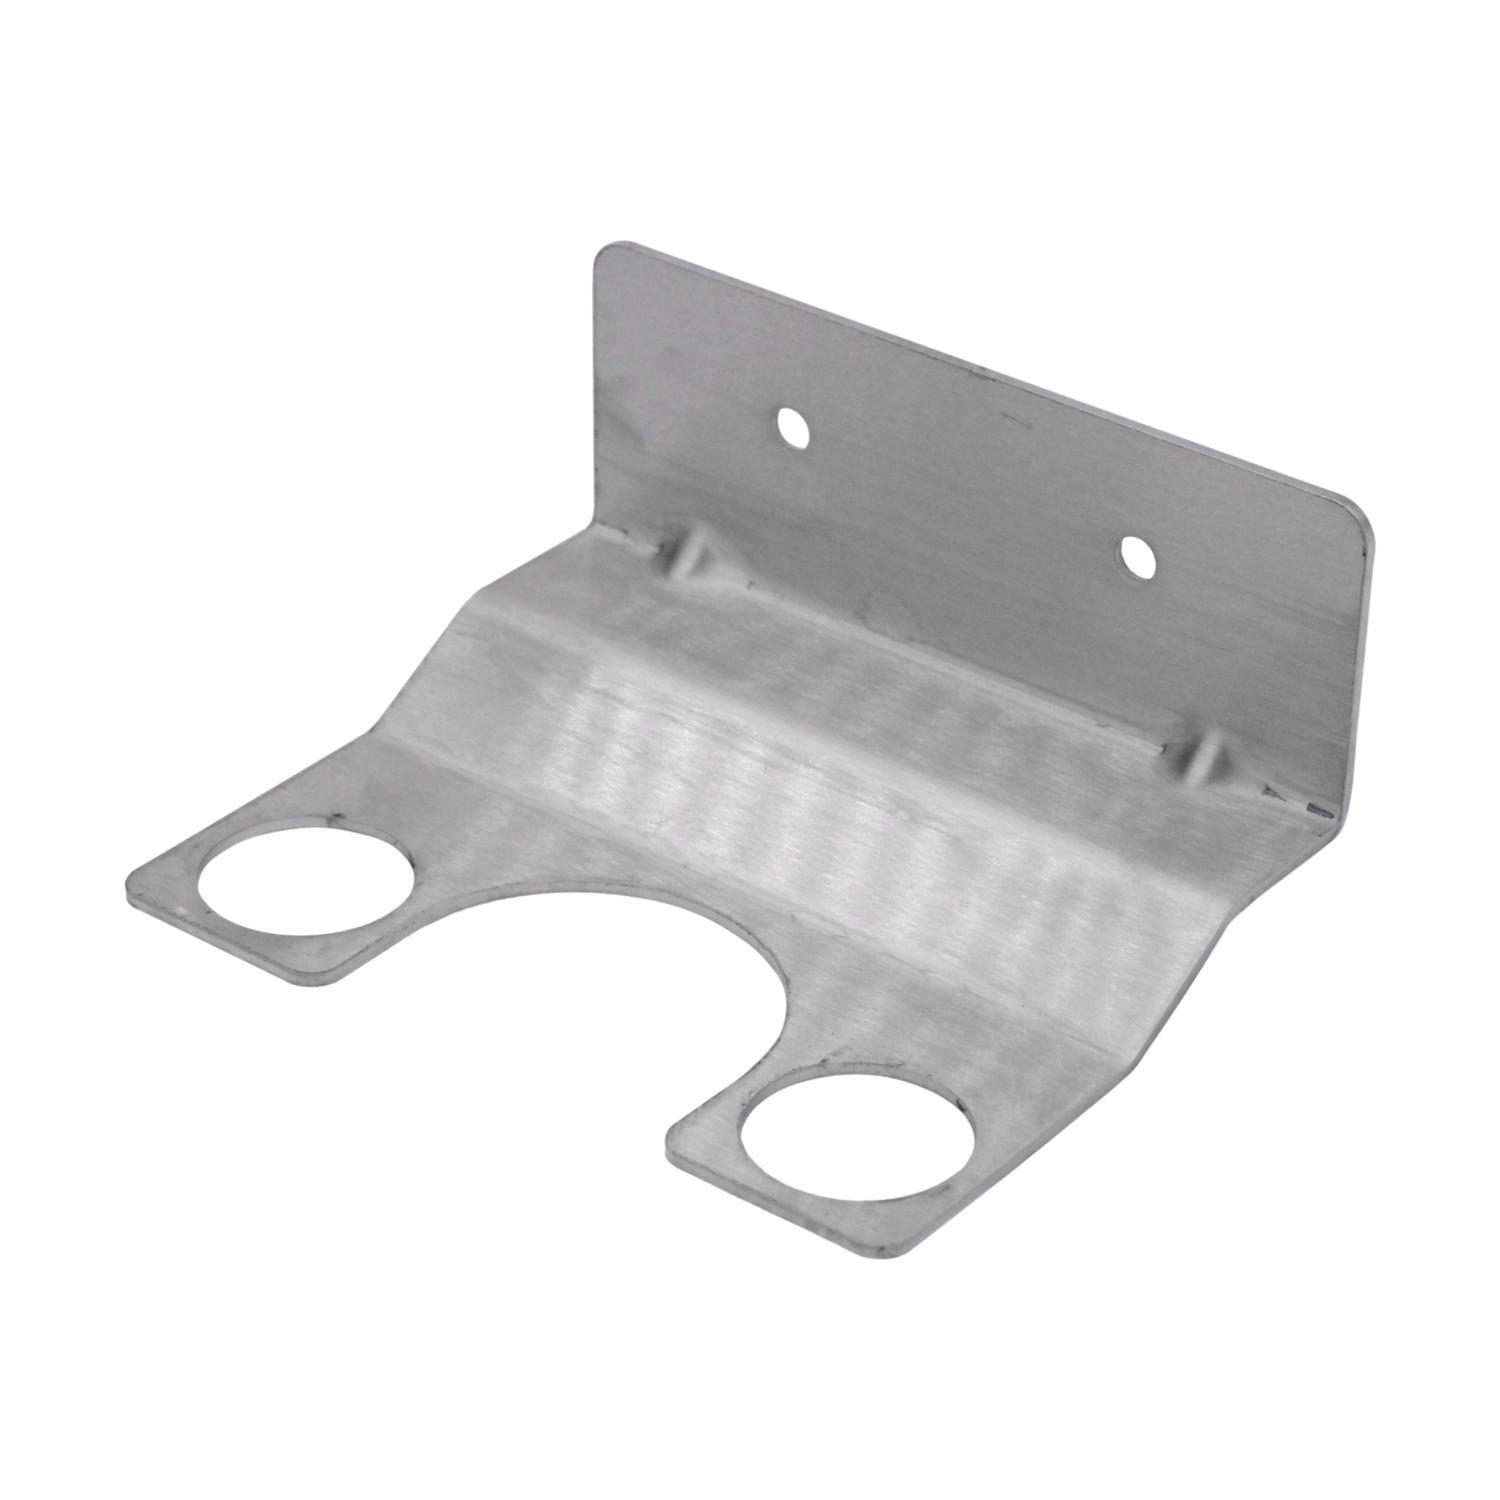 SUPPORT DE FIXATION INOX POUR NW340/400